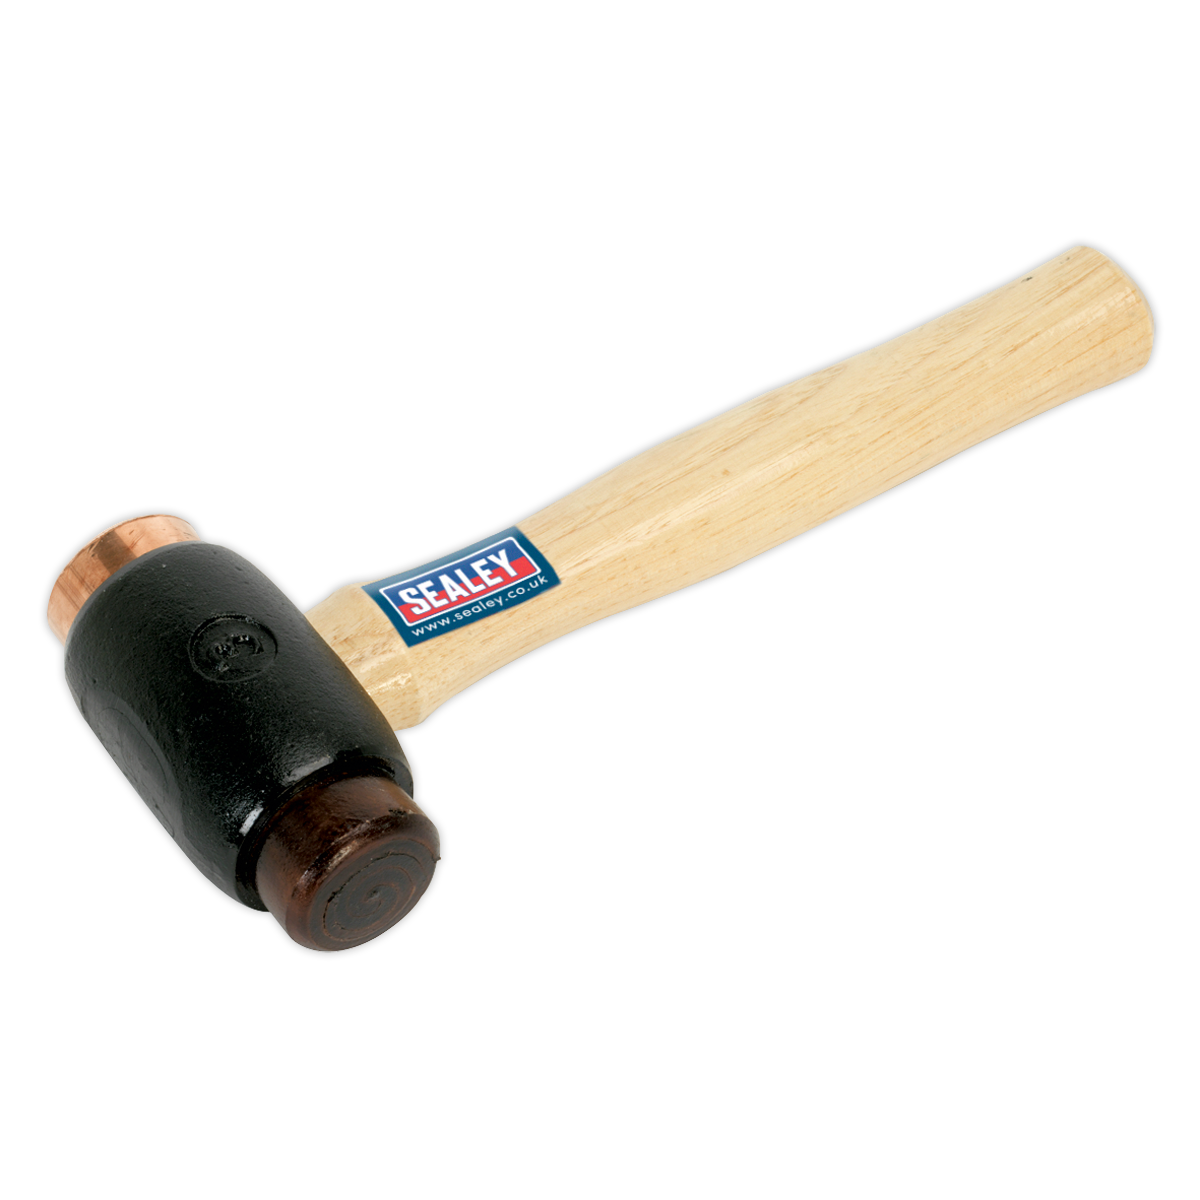 Sealey Copper/Rawhide Faced Hammer 3.5lb Hickory Shaft